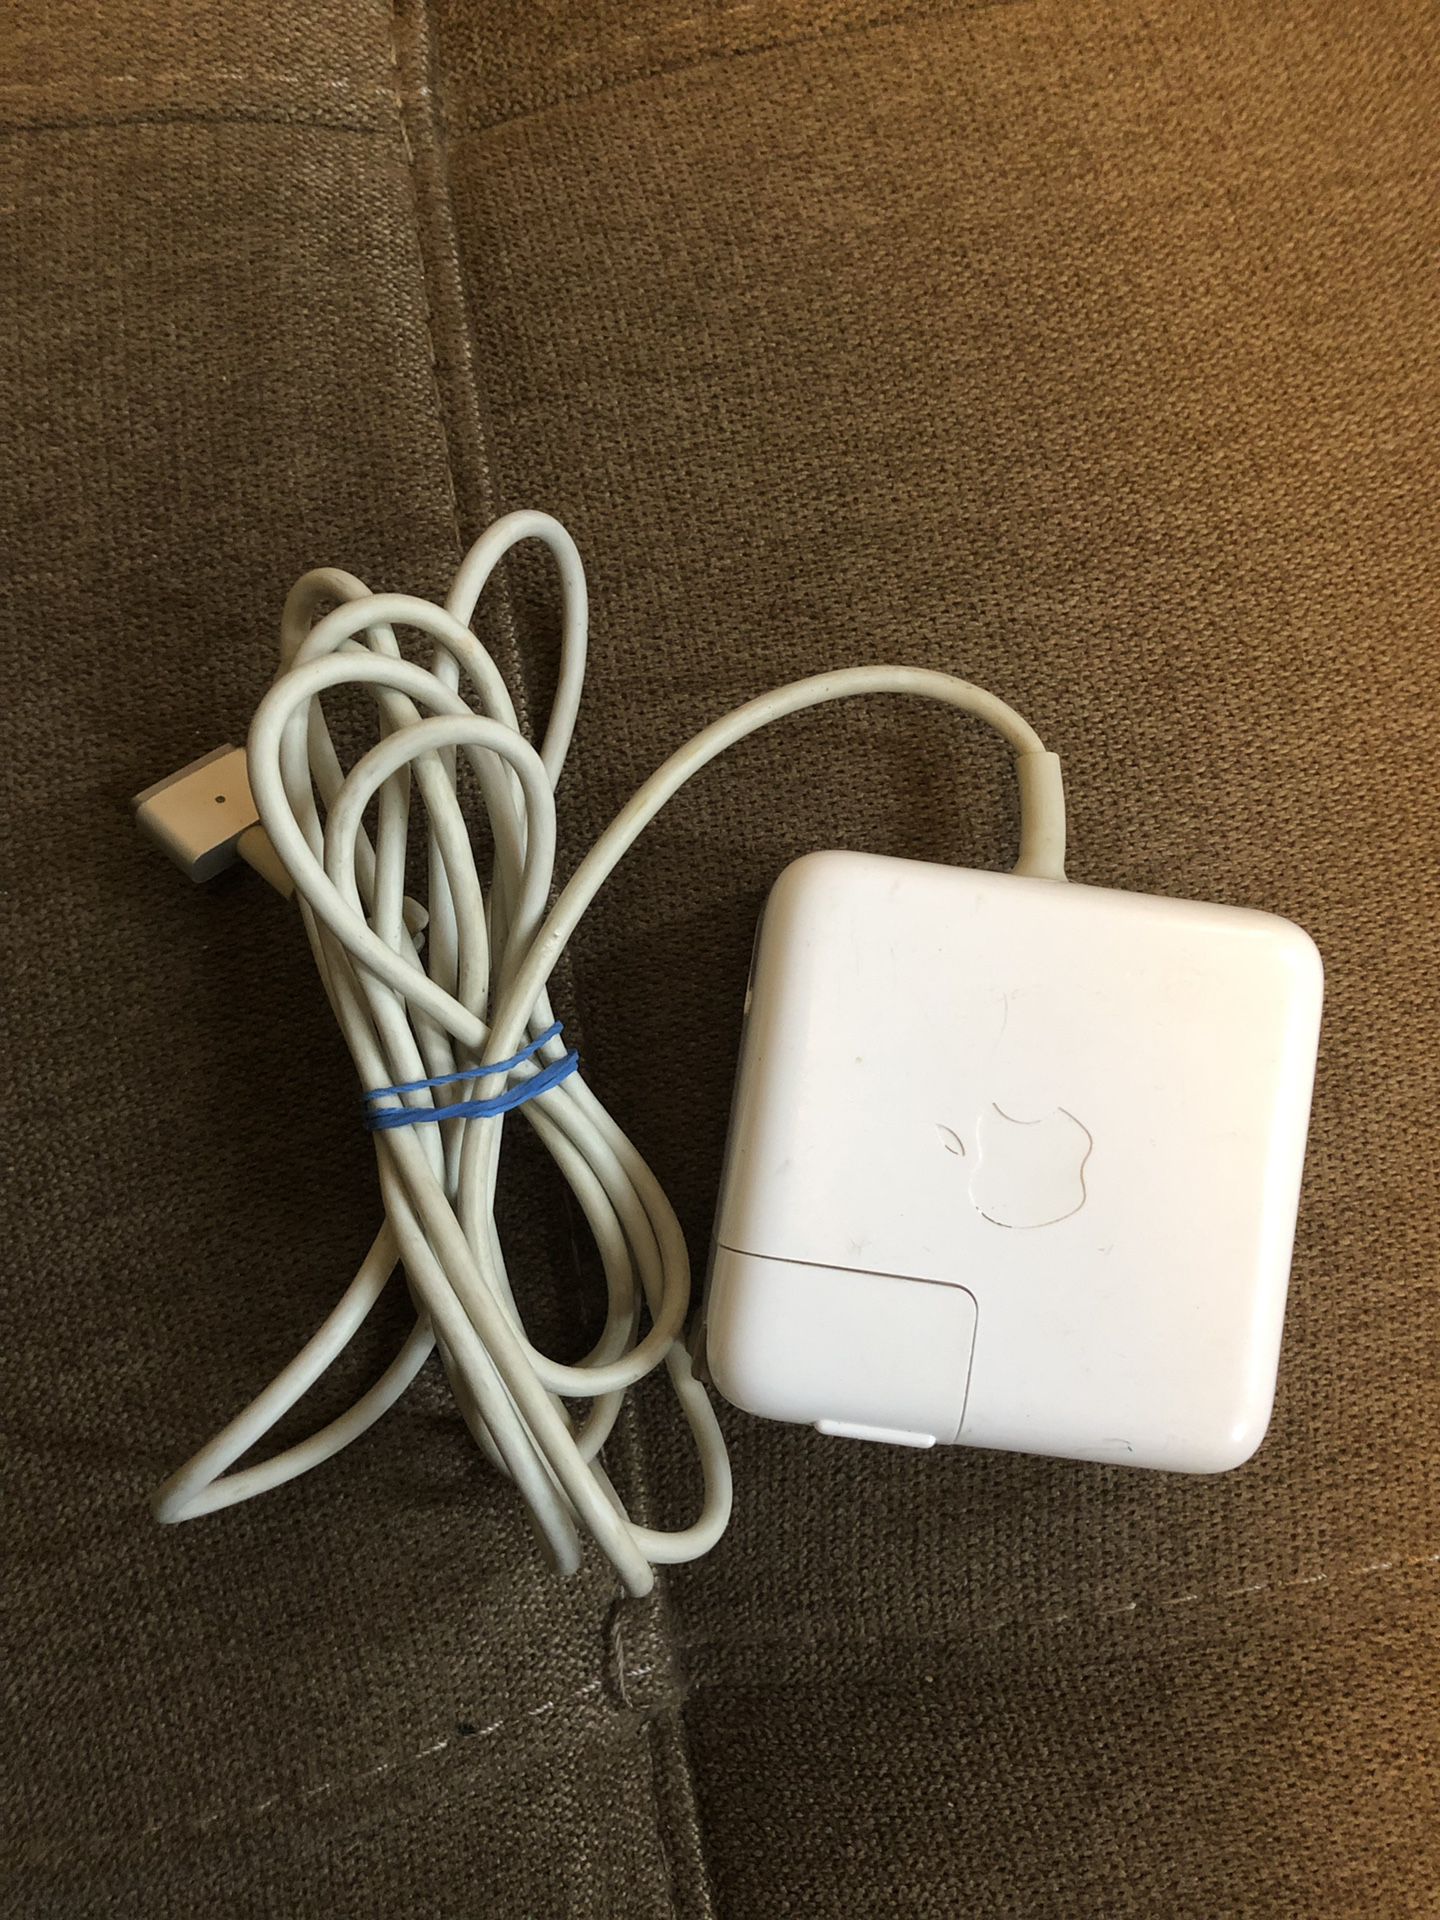 Apple 45w MagSafe 2 Power Adapter